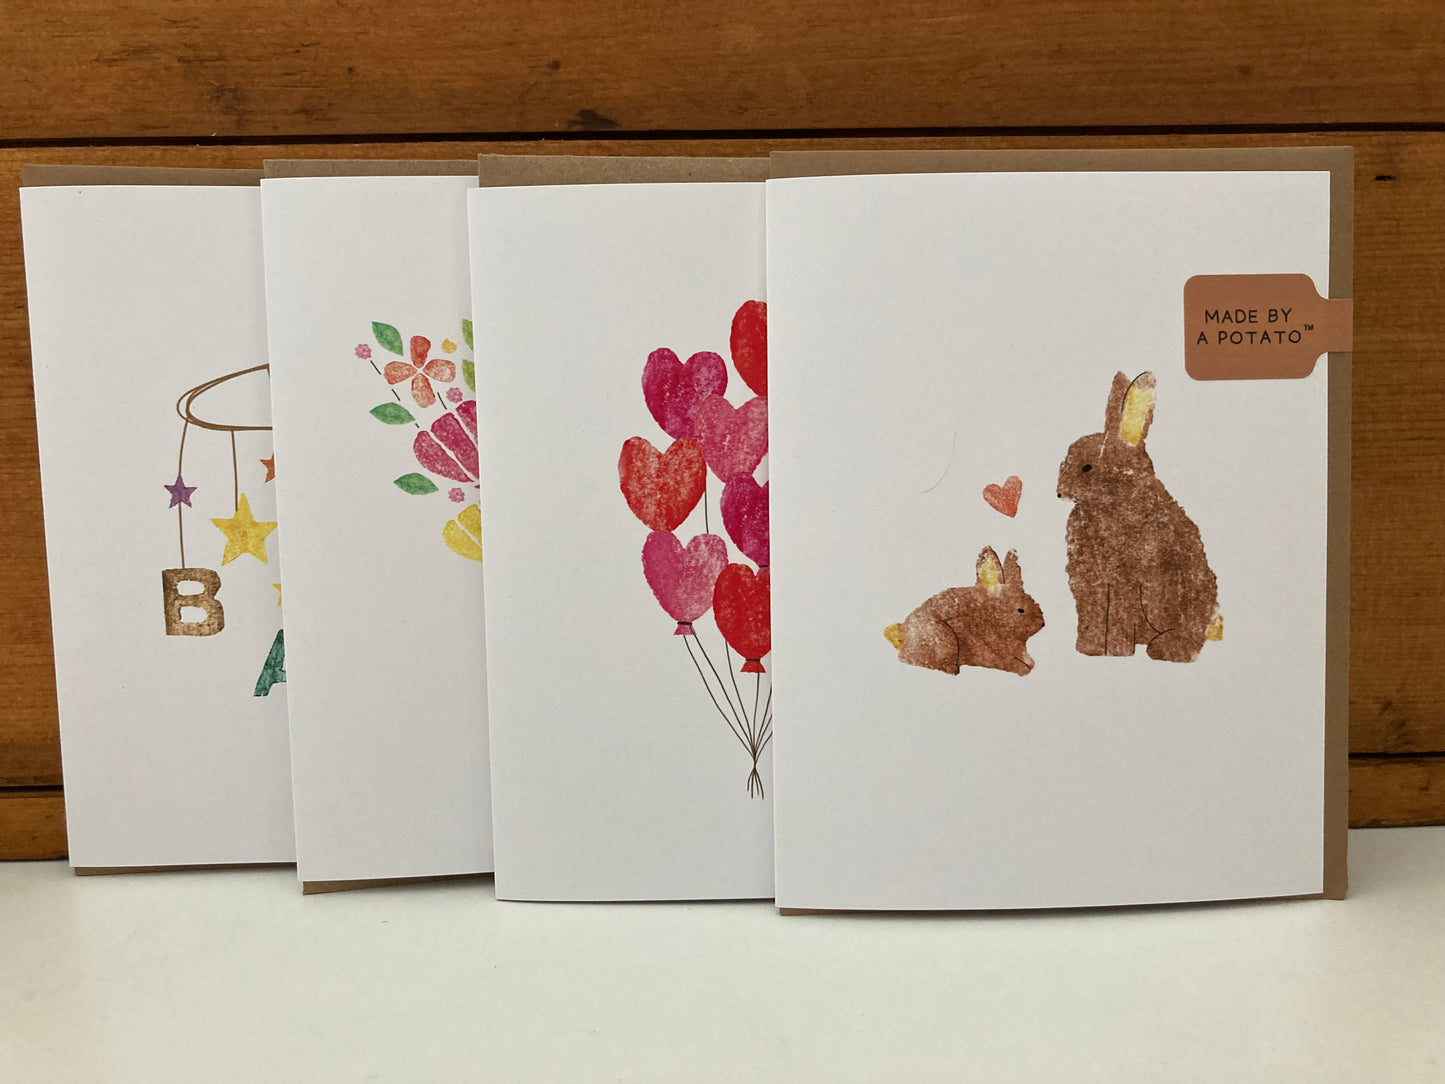 Greeting Cards - By a Potato WELCOME BABY